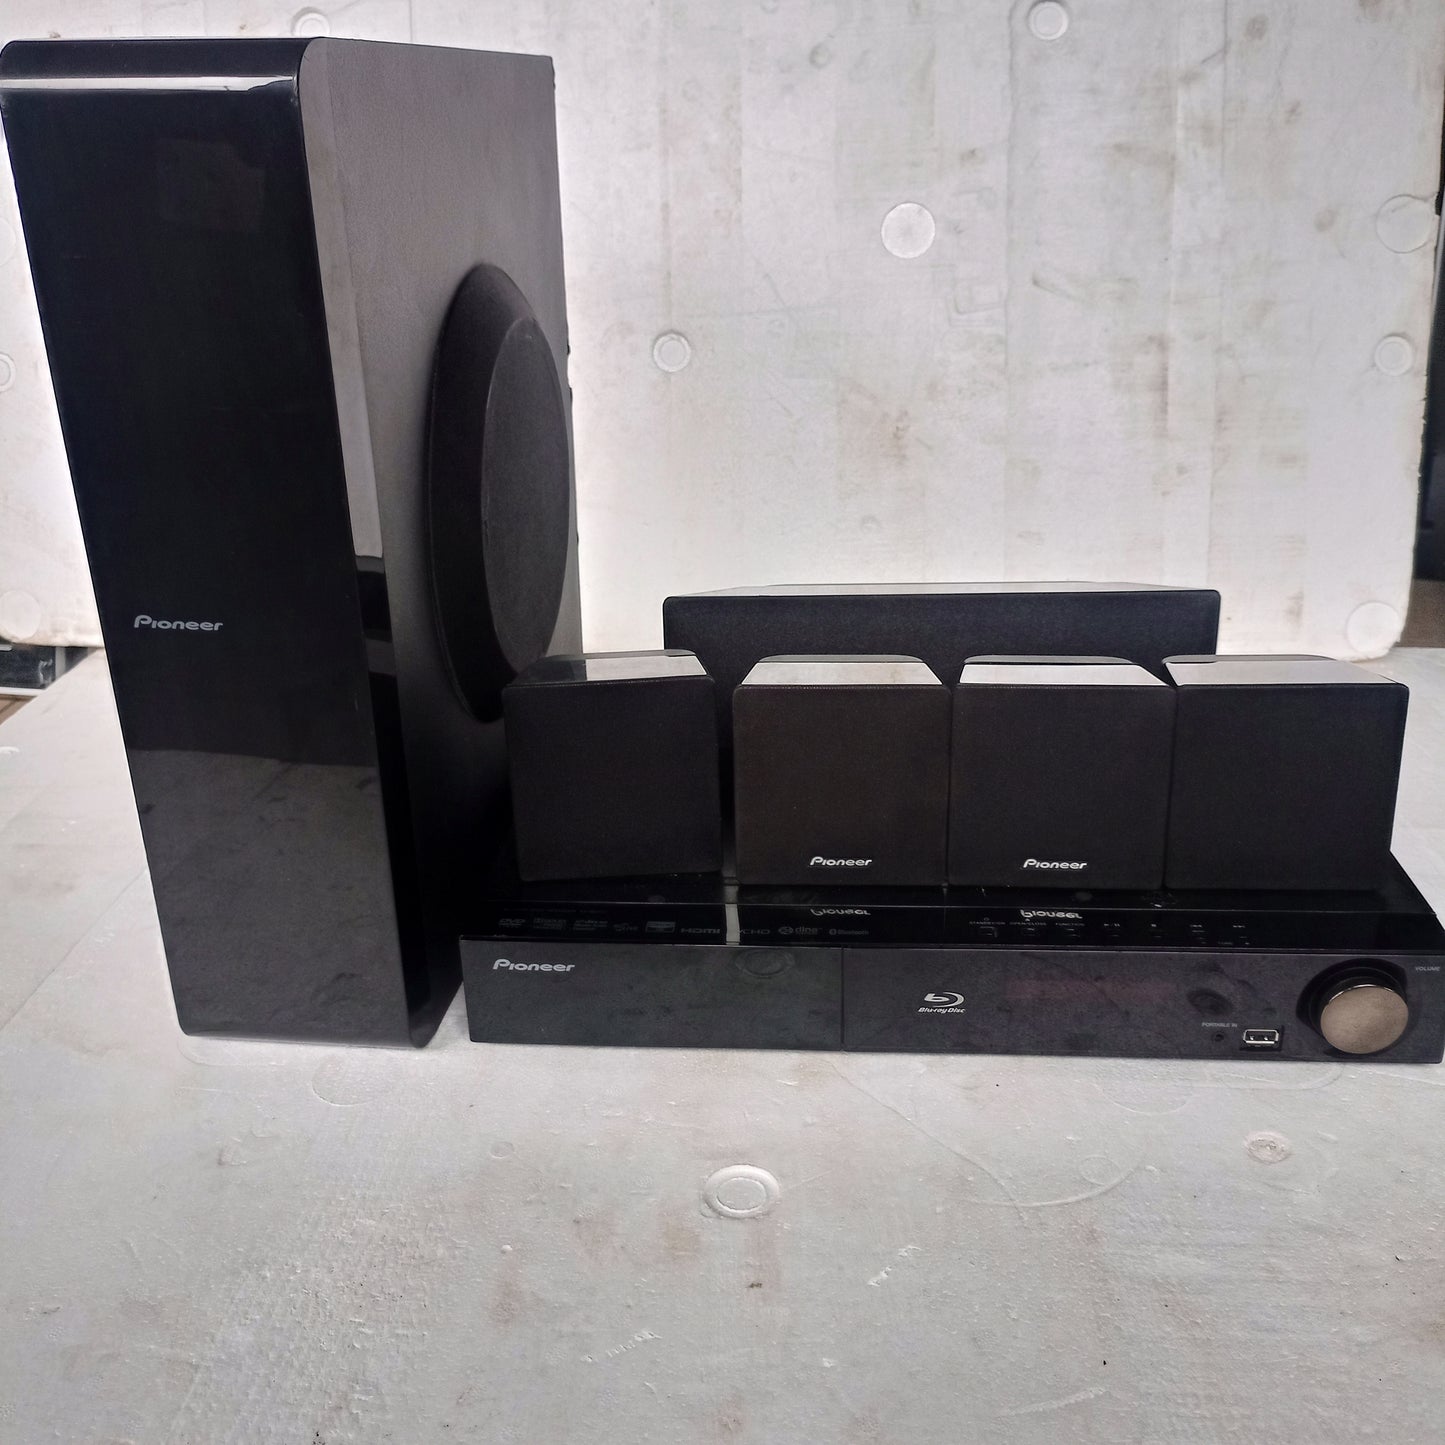 Pioneer Blu-ray Streaming 5.1 Home-Theater System with iPod Cradle